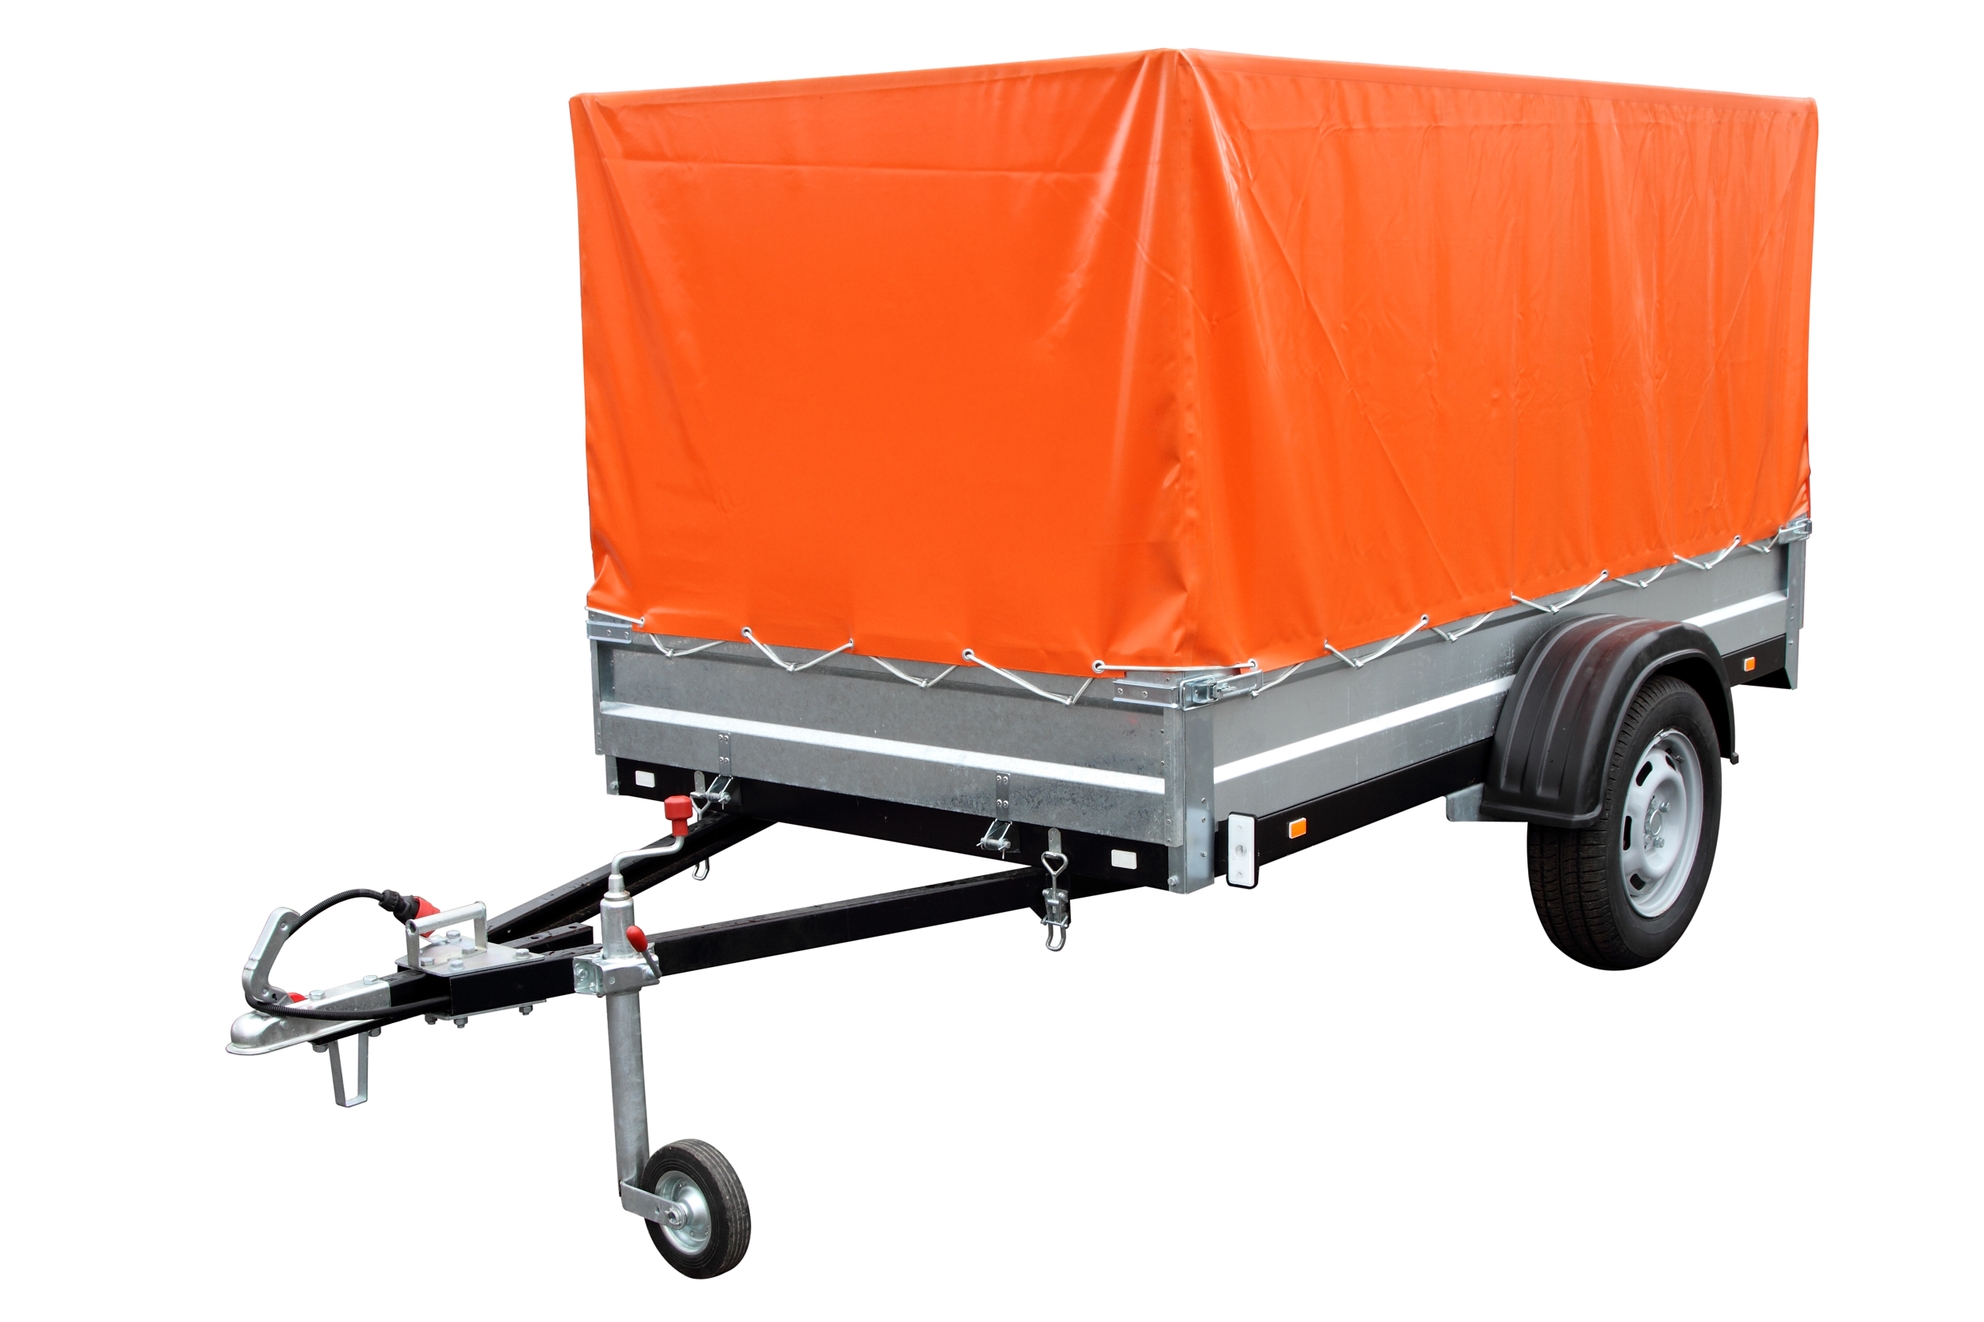 40 uses for tarpaulins; trailer cover; equipment cover